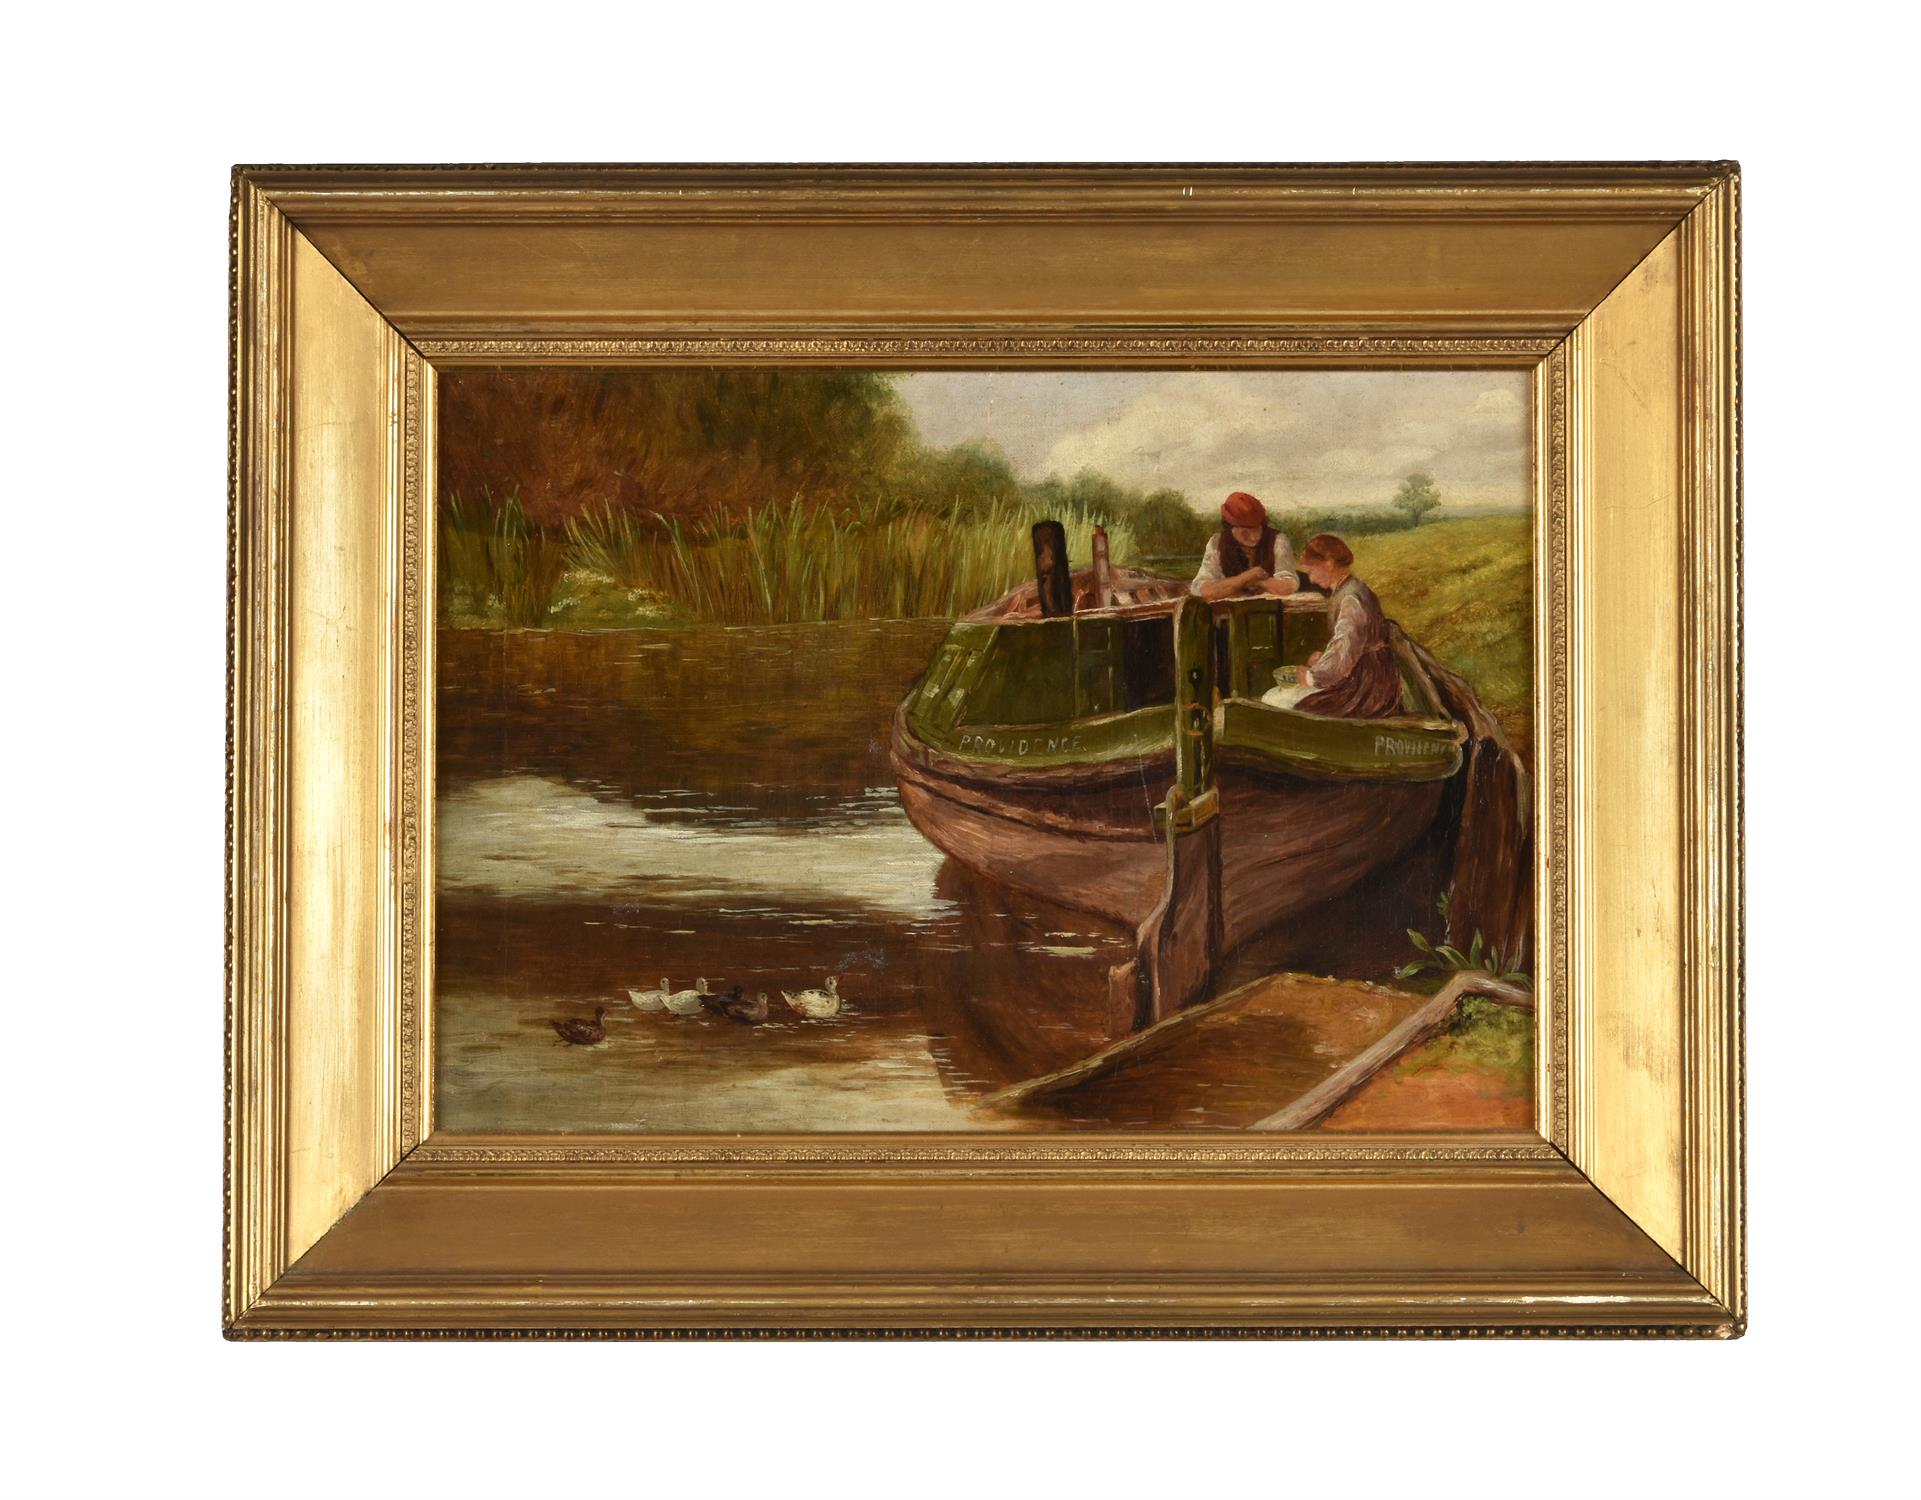 English School (19th century), Figures in a boat, with ducks on the river - Image 2 of 3